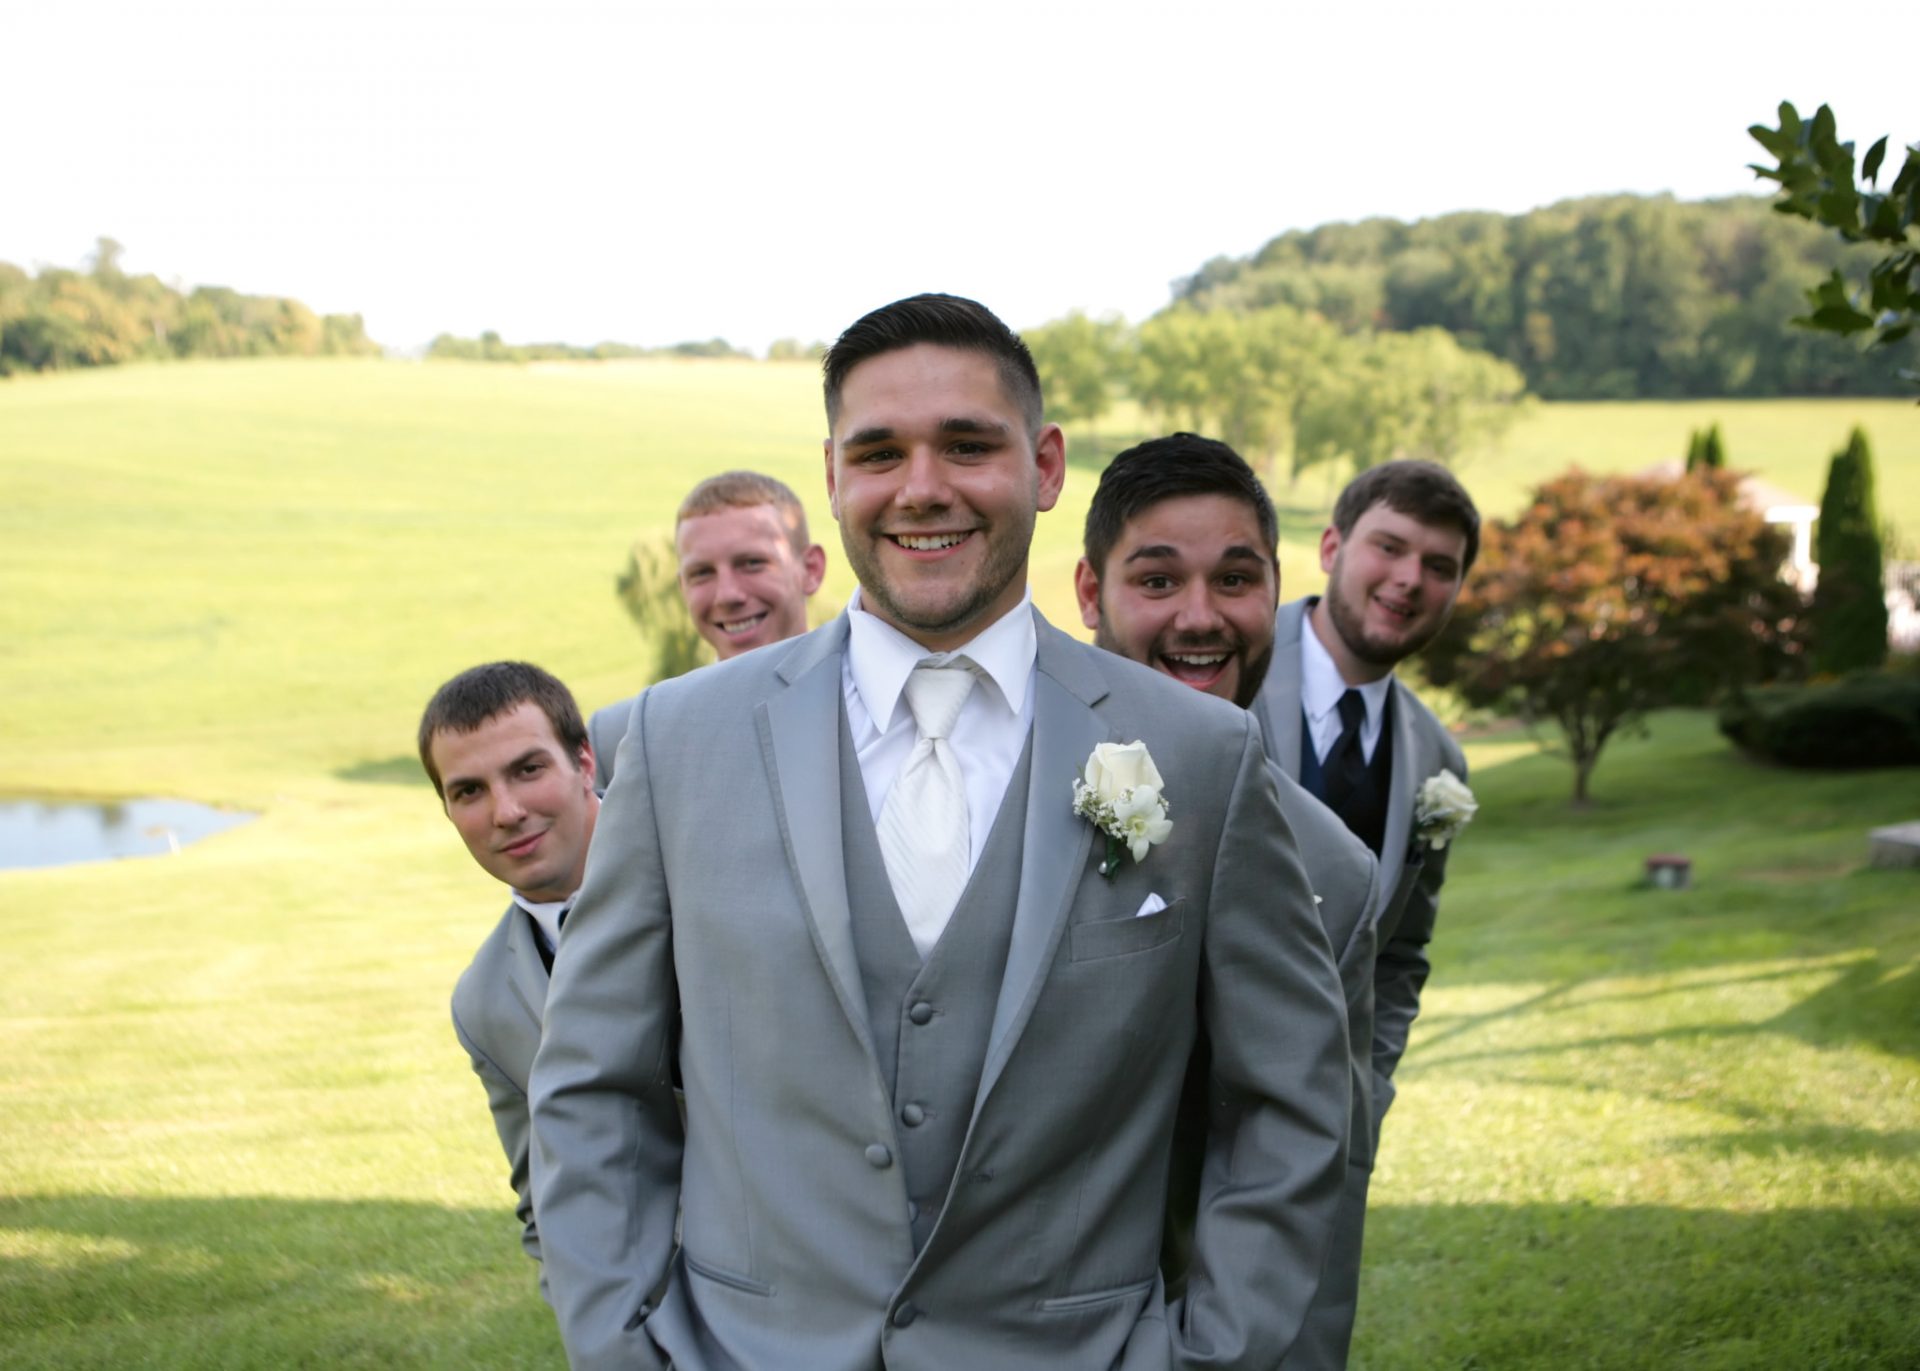 groomsmen on the back lawn during spring wedding in Maryland